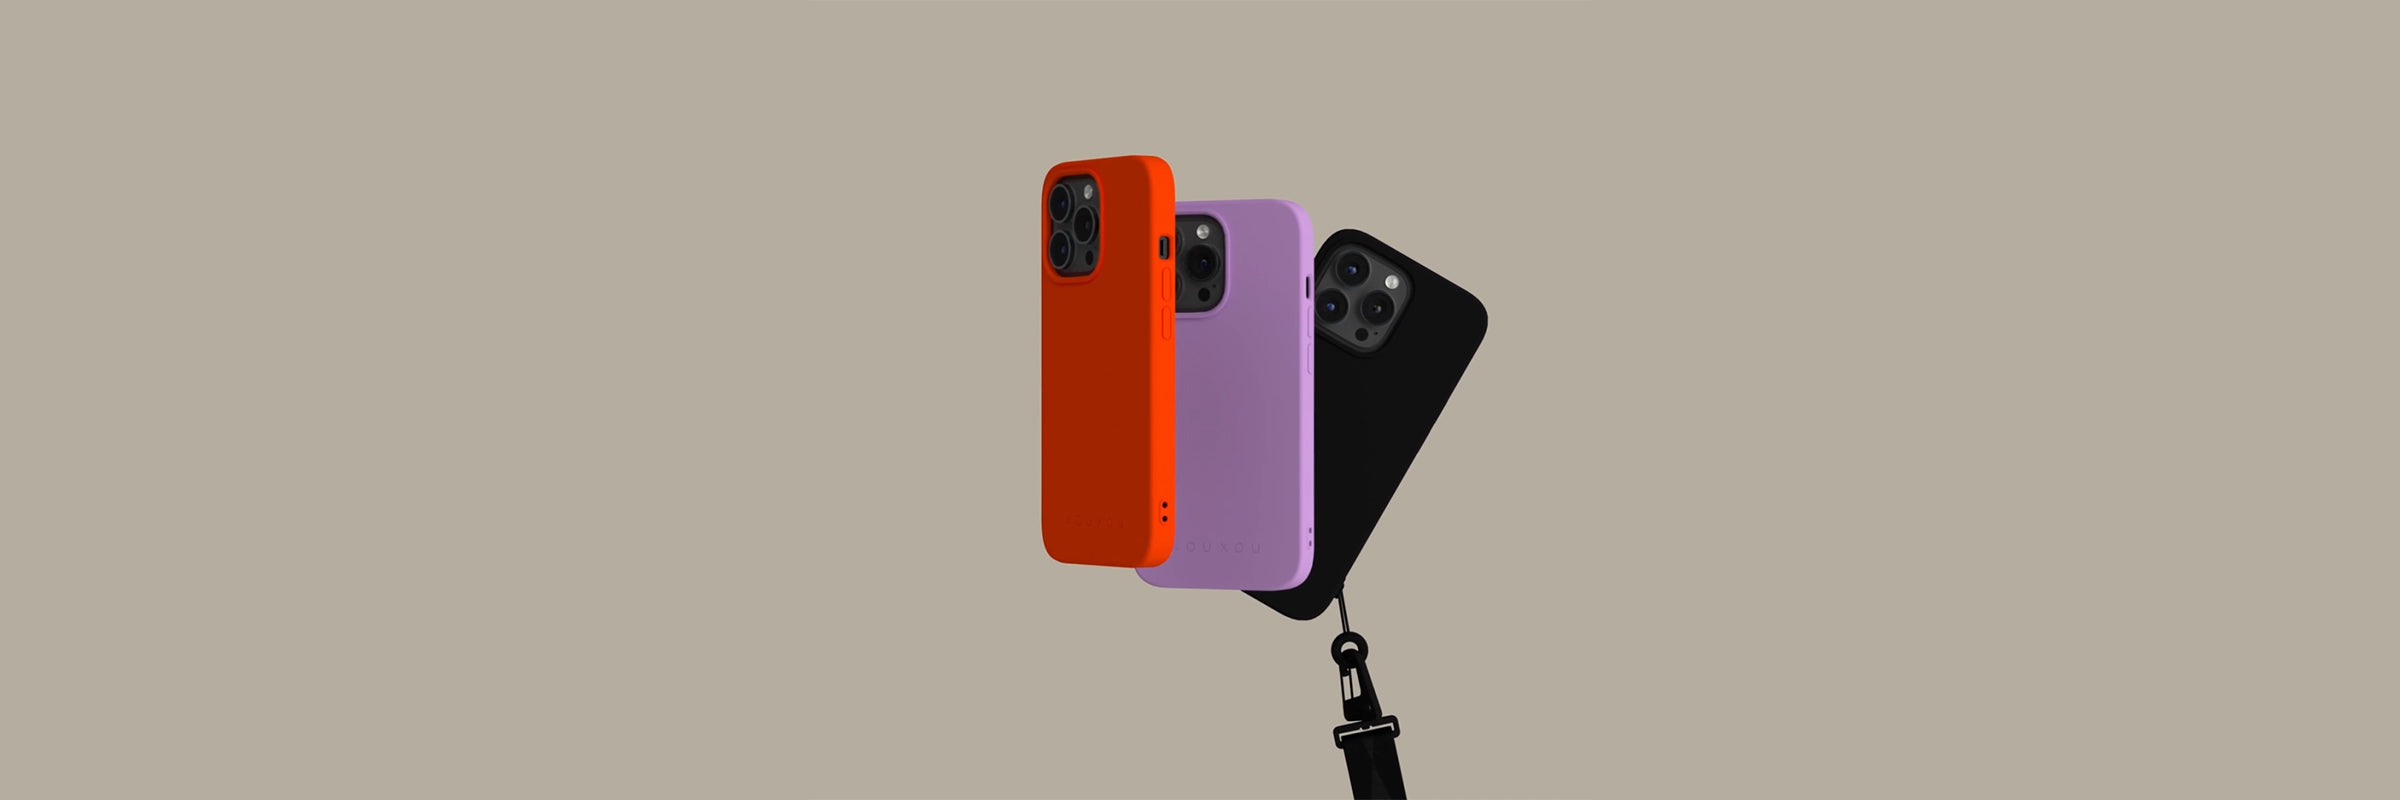 Colorful phone cases made for your iPhone | XOUXOU